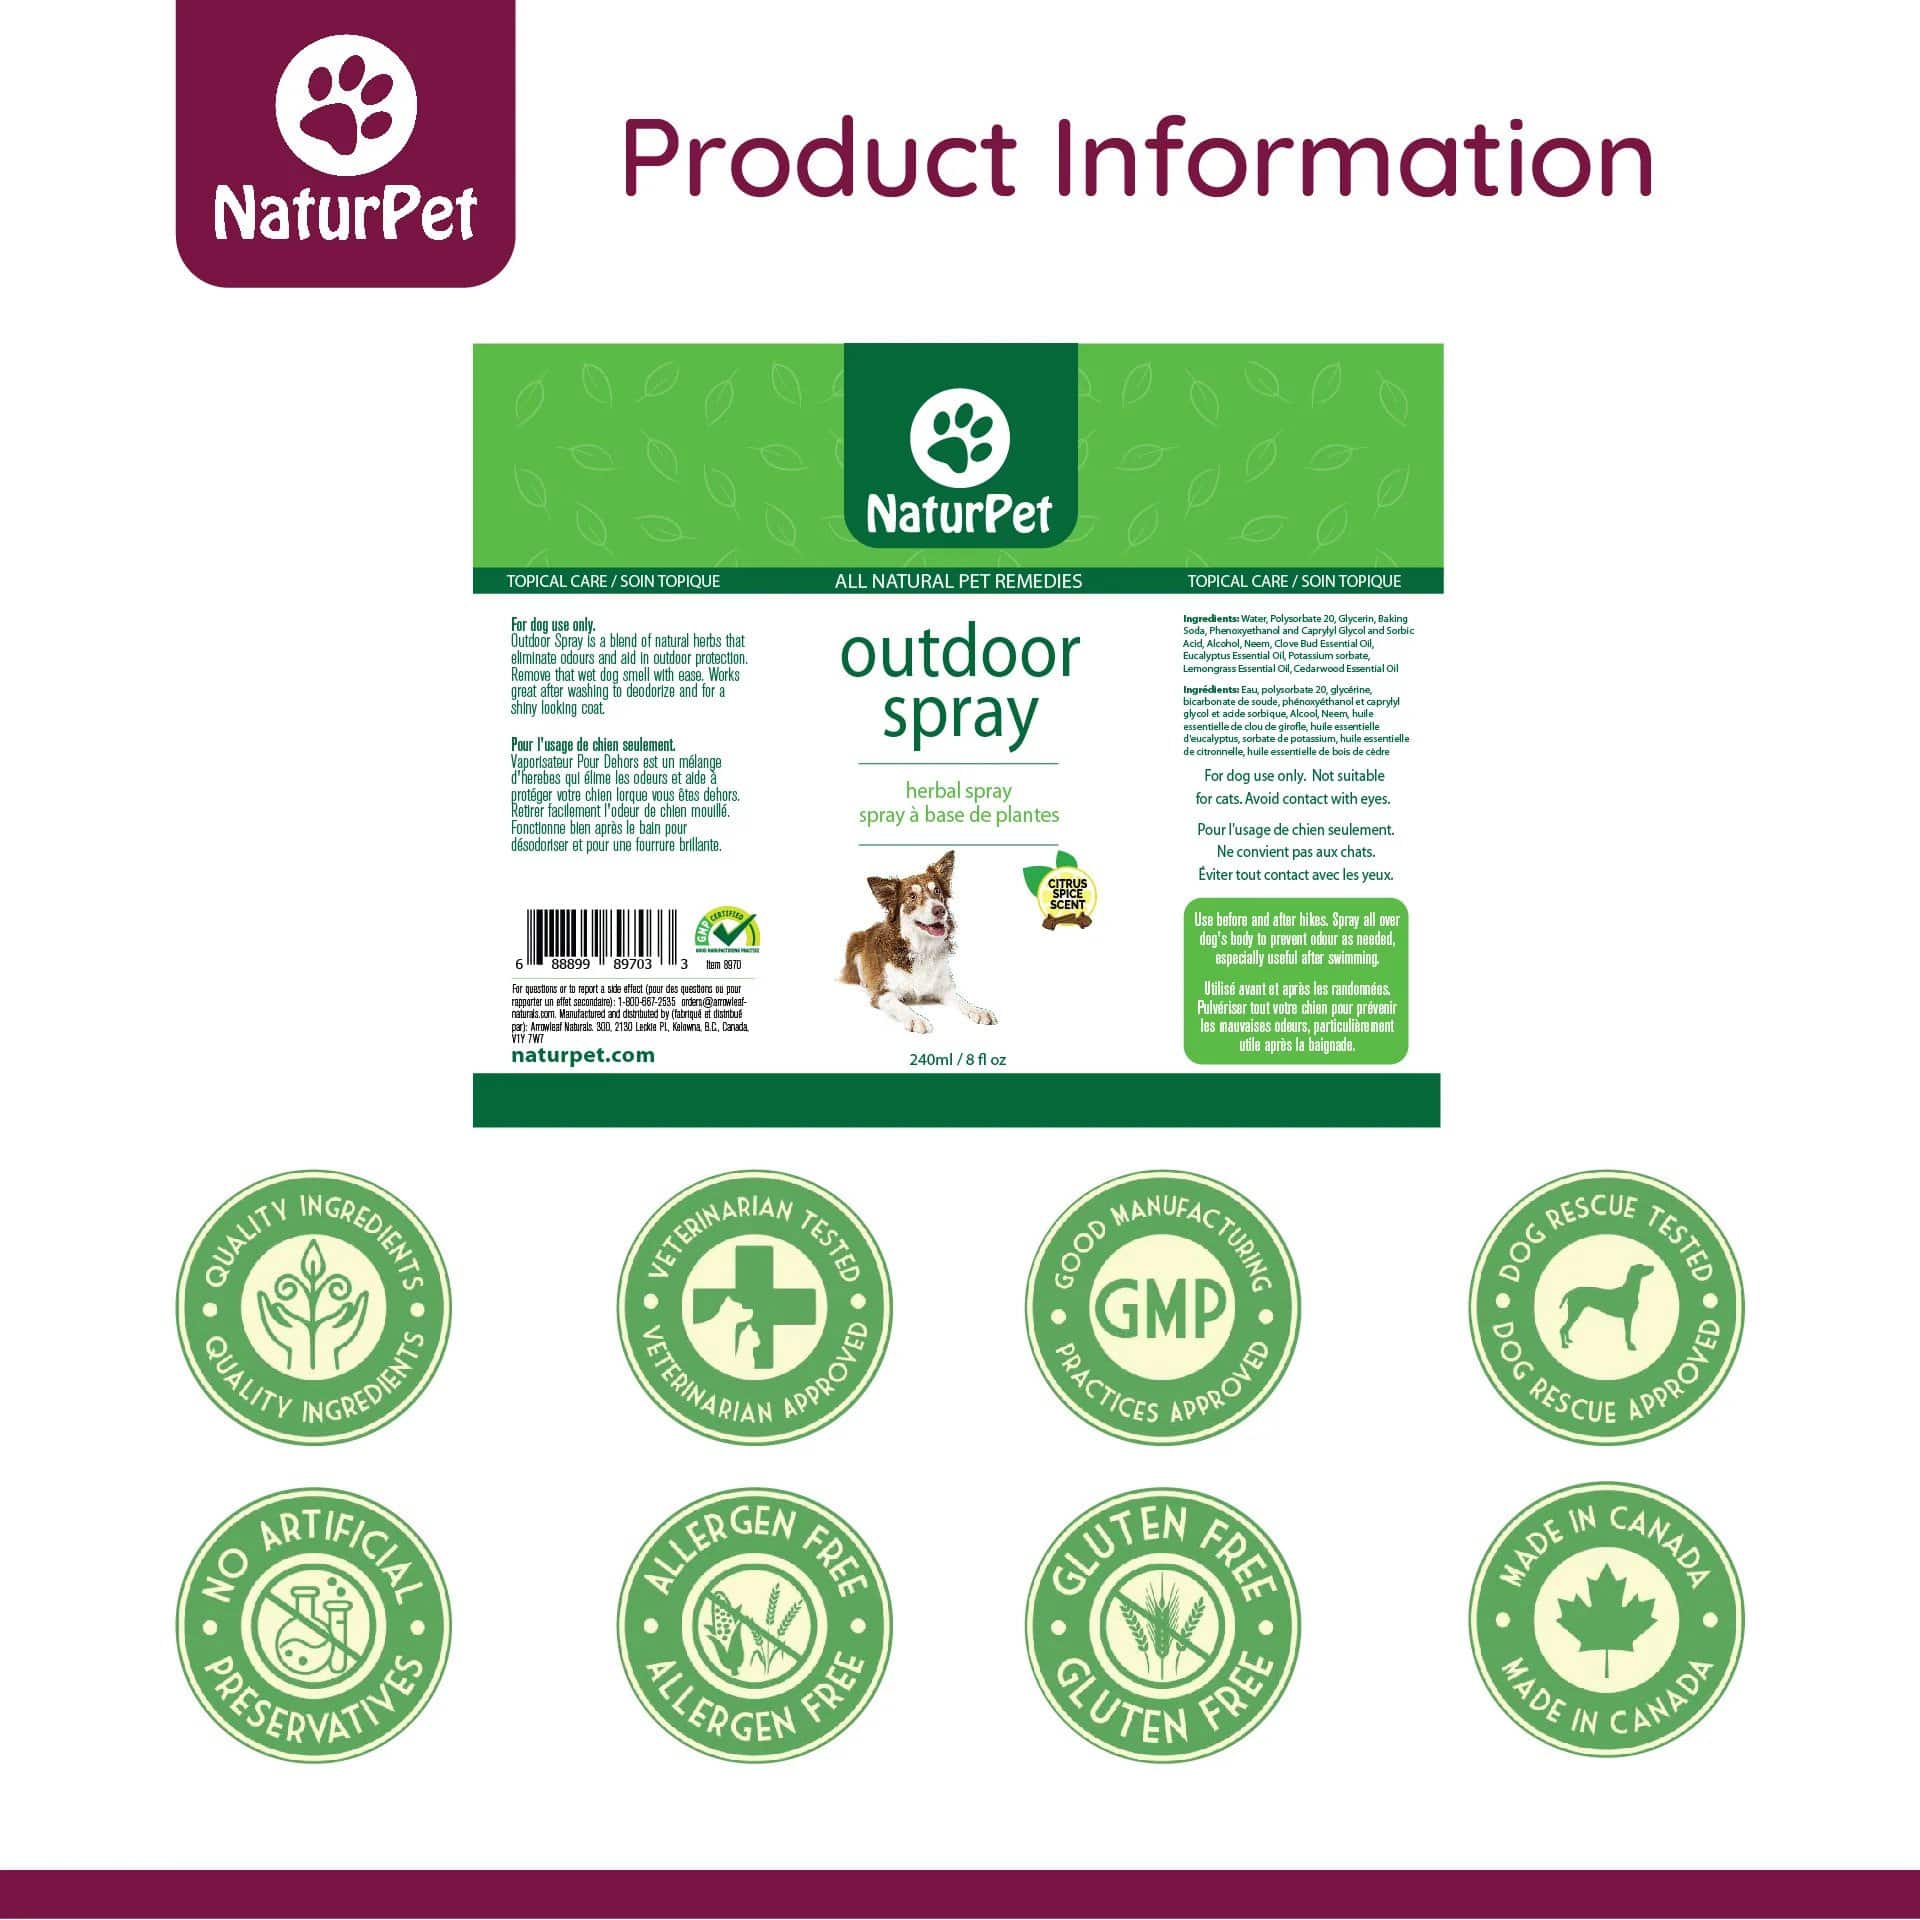 NaturPet Outdoor Spray - A Must-Have For Hikes & Wet Dogs! Product Information